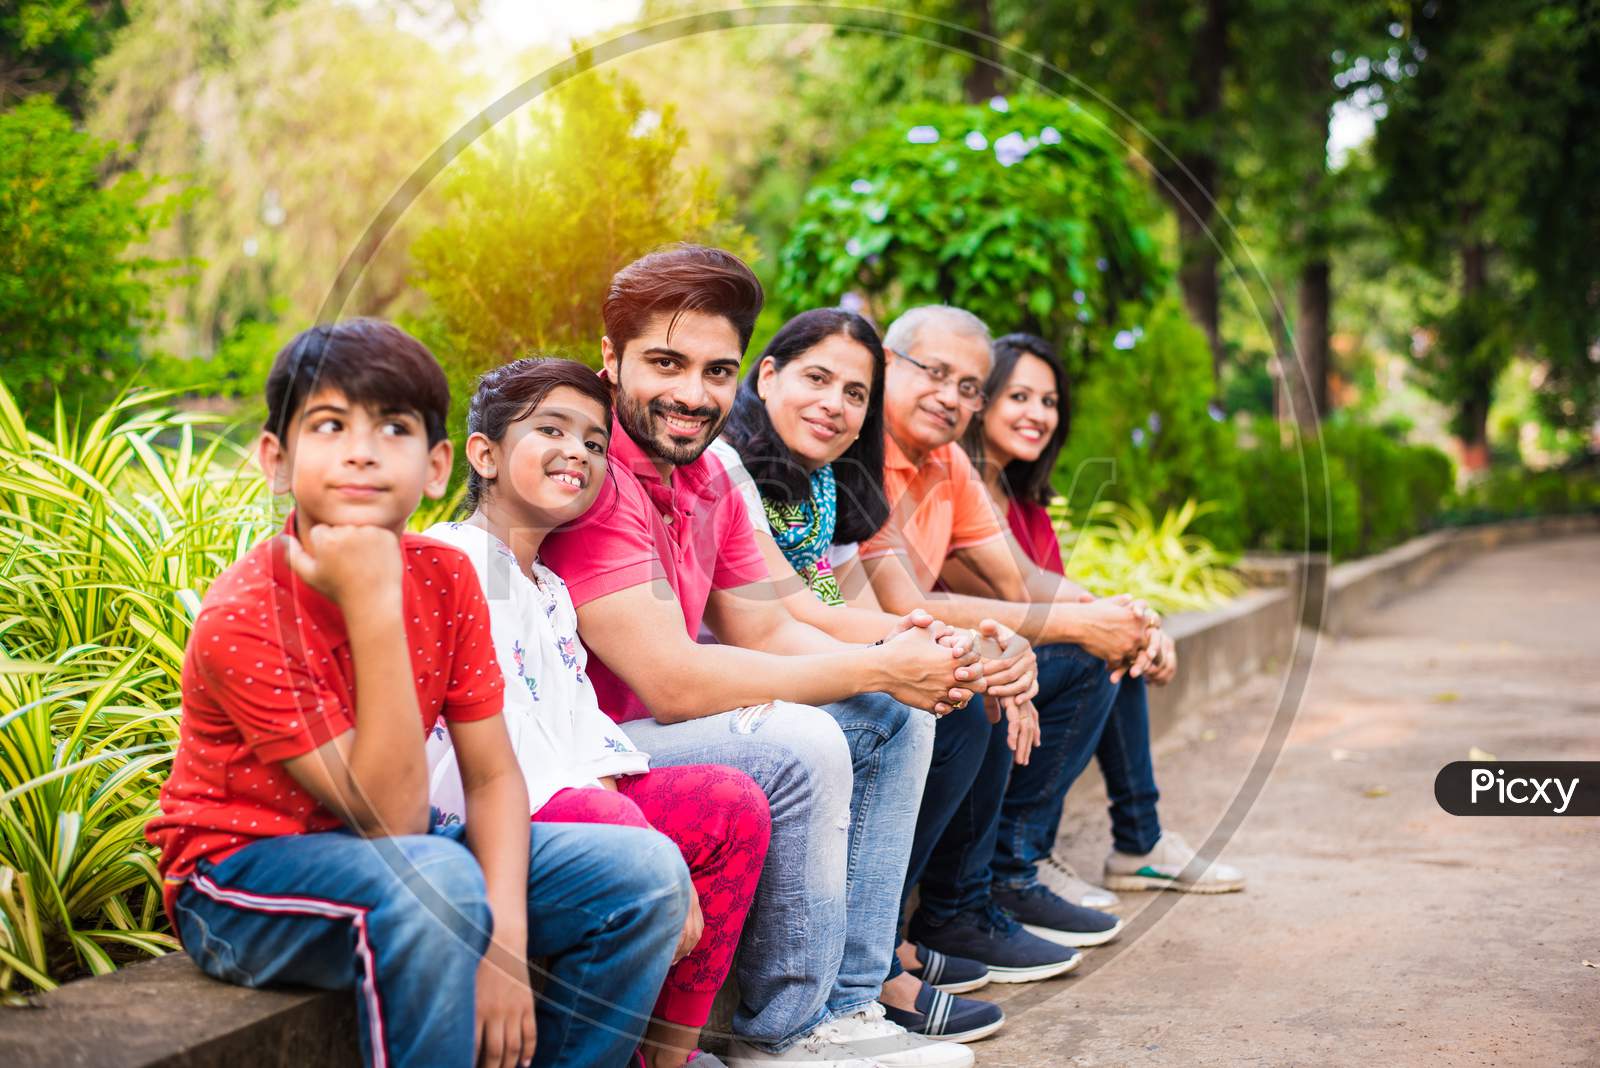 indian family of 6 sitting at wall in garden / park